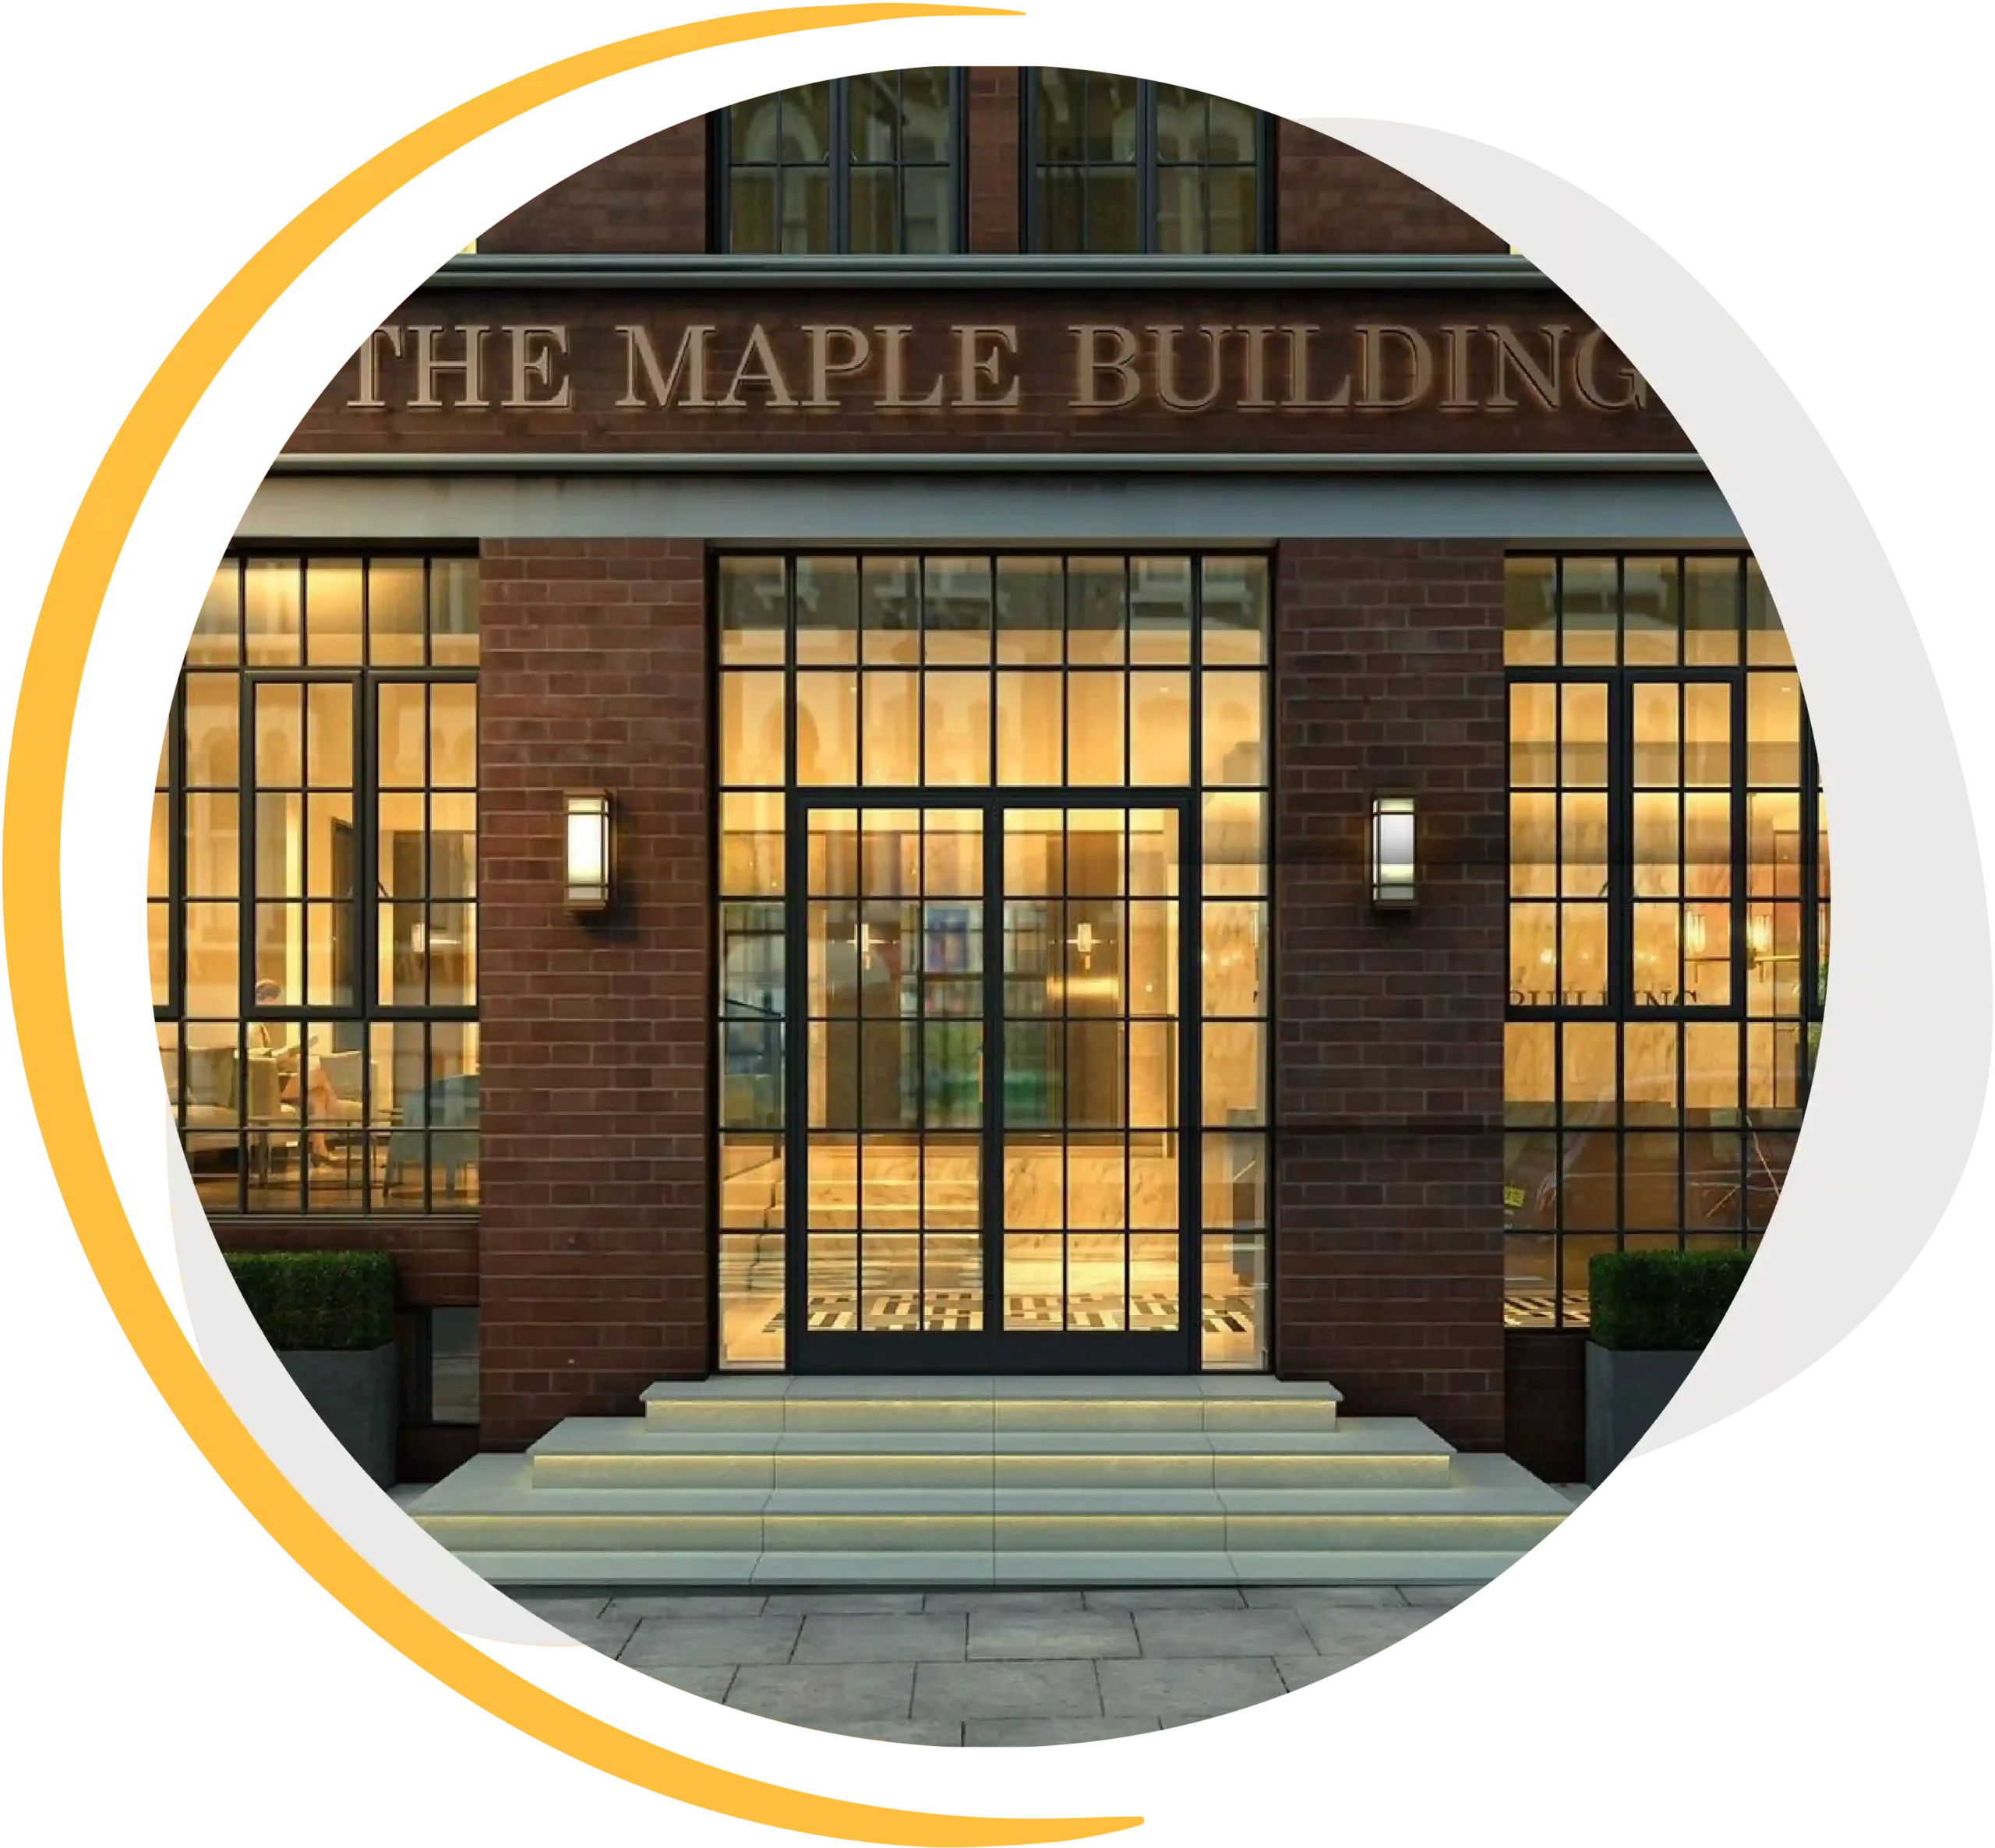 The Maple Building